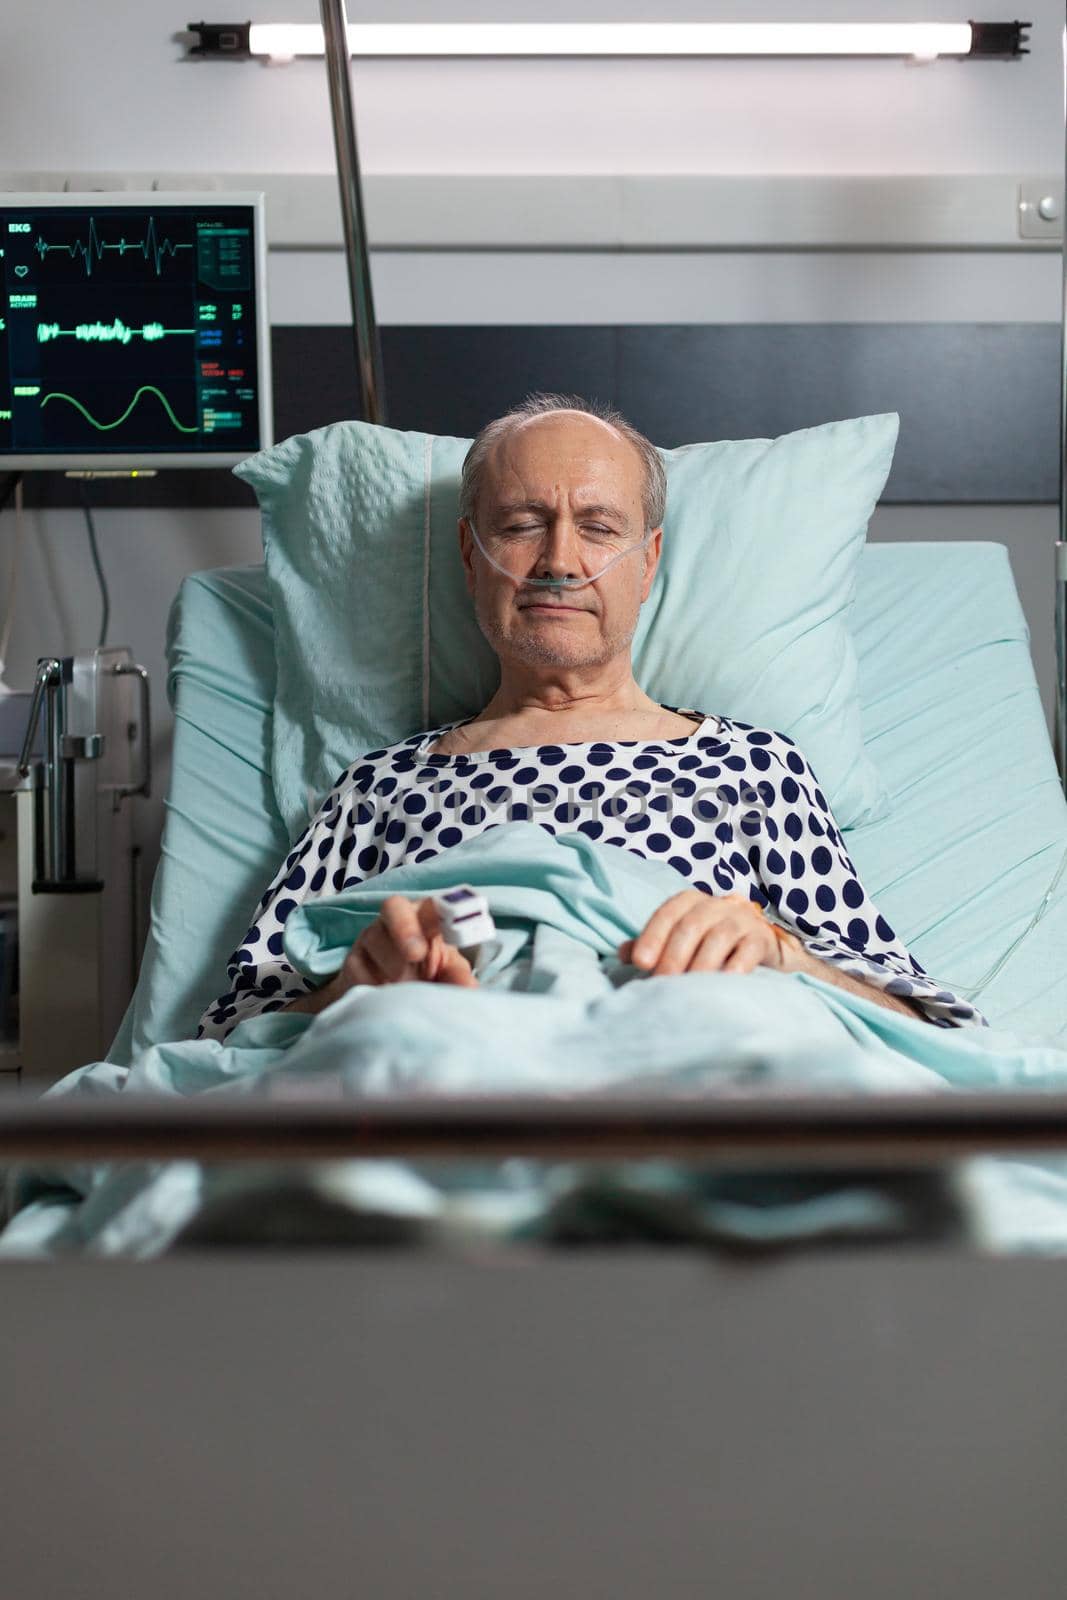 Portrait of sick senior man patient resting in hospital bed, breathing with help from oxygen mask because of lungs infection, having oximeter attached on finger.